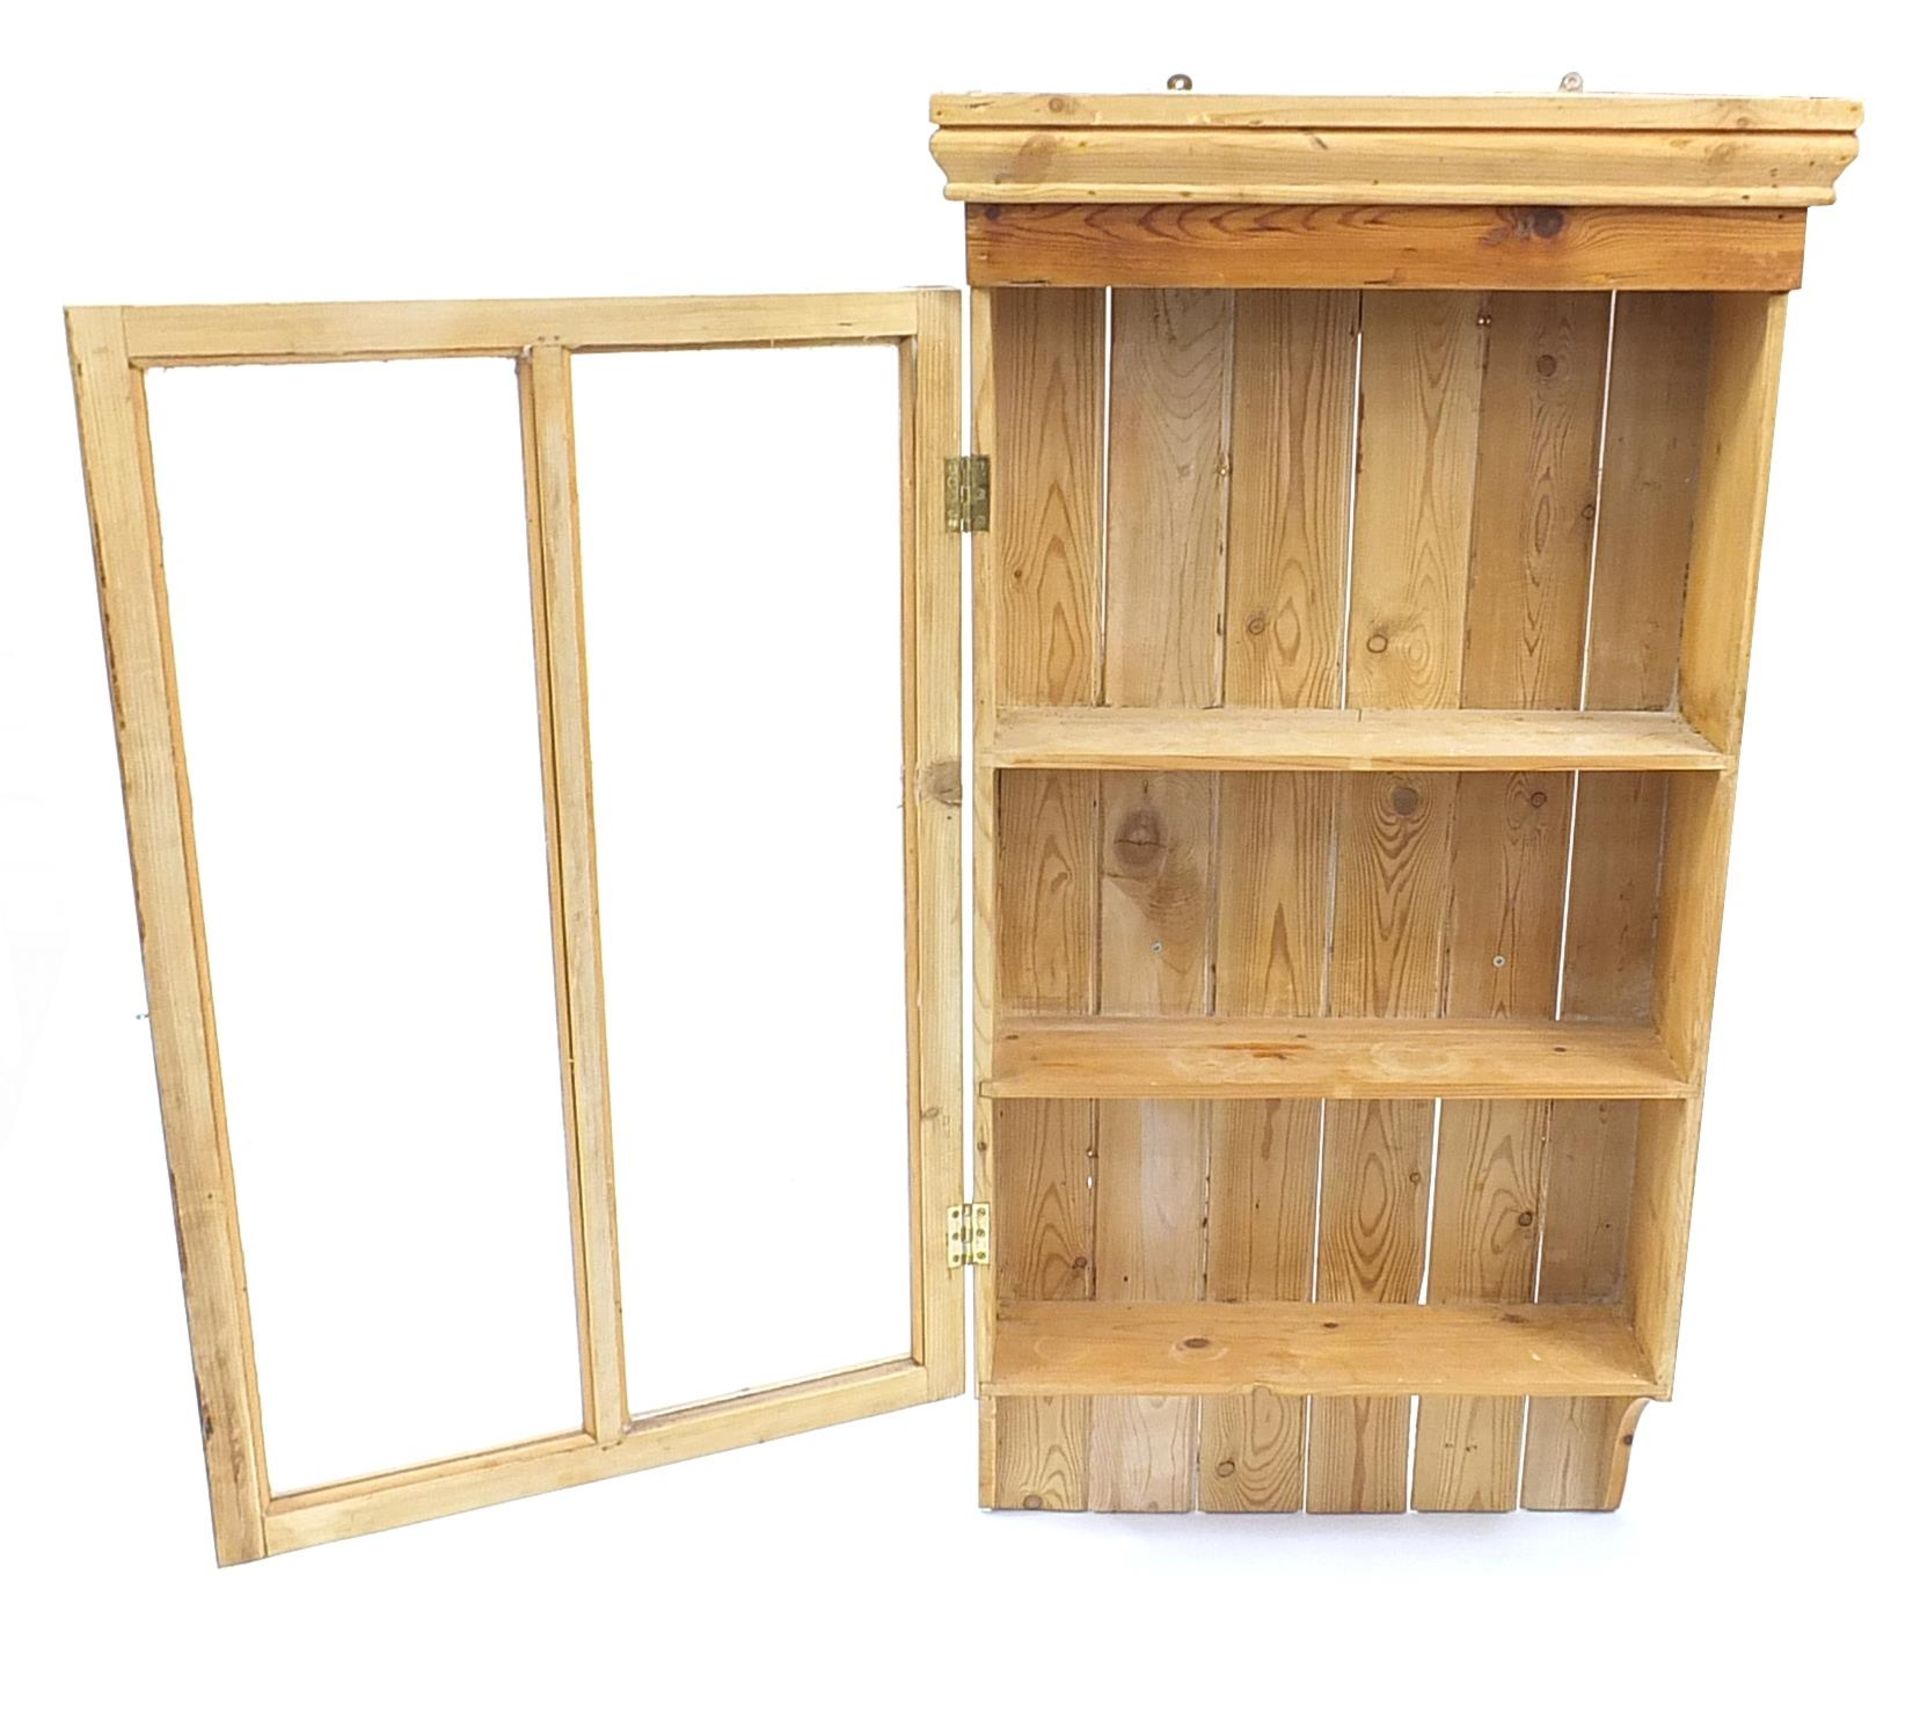 Pine wall hanging display case with two shelves, 116cm H x 59cm W x 18cm D - Image 2 of 3